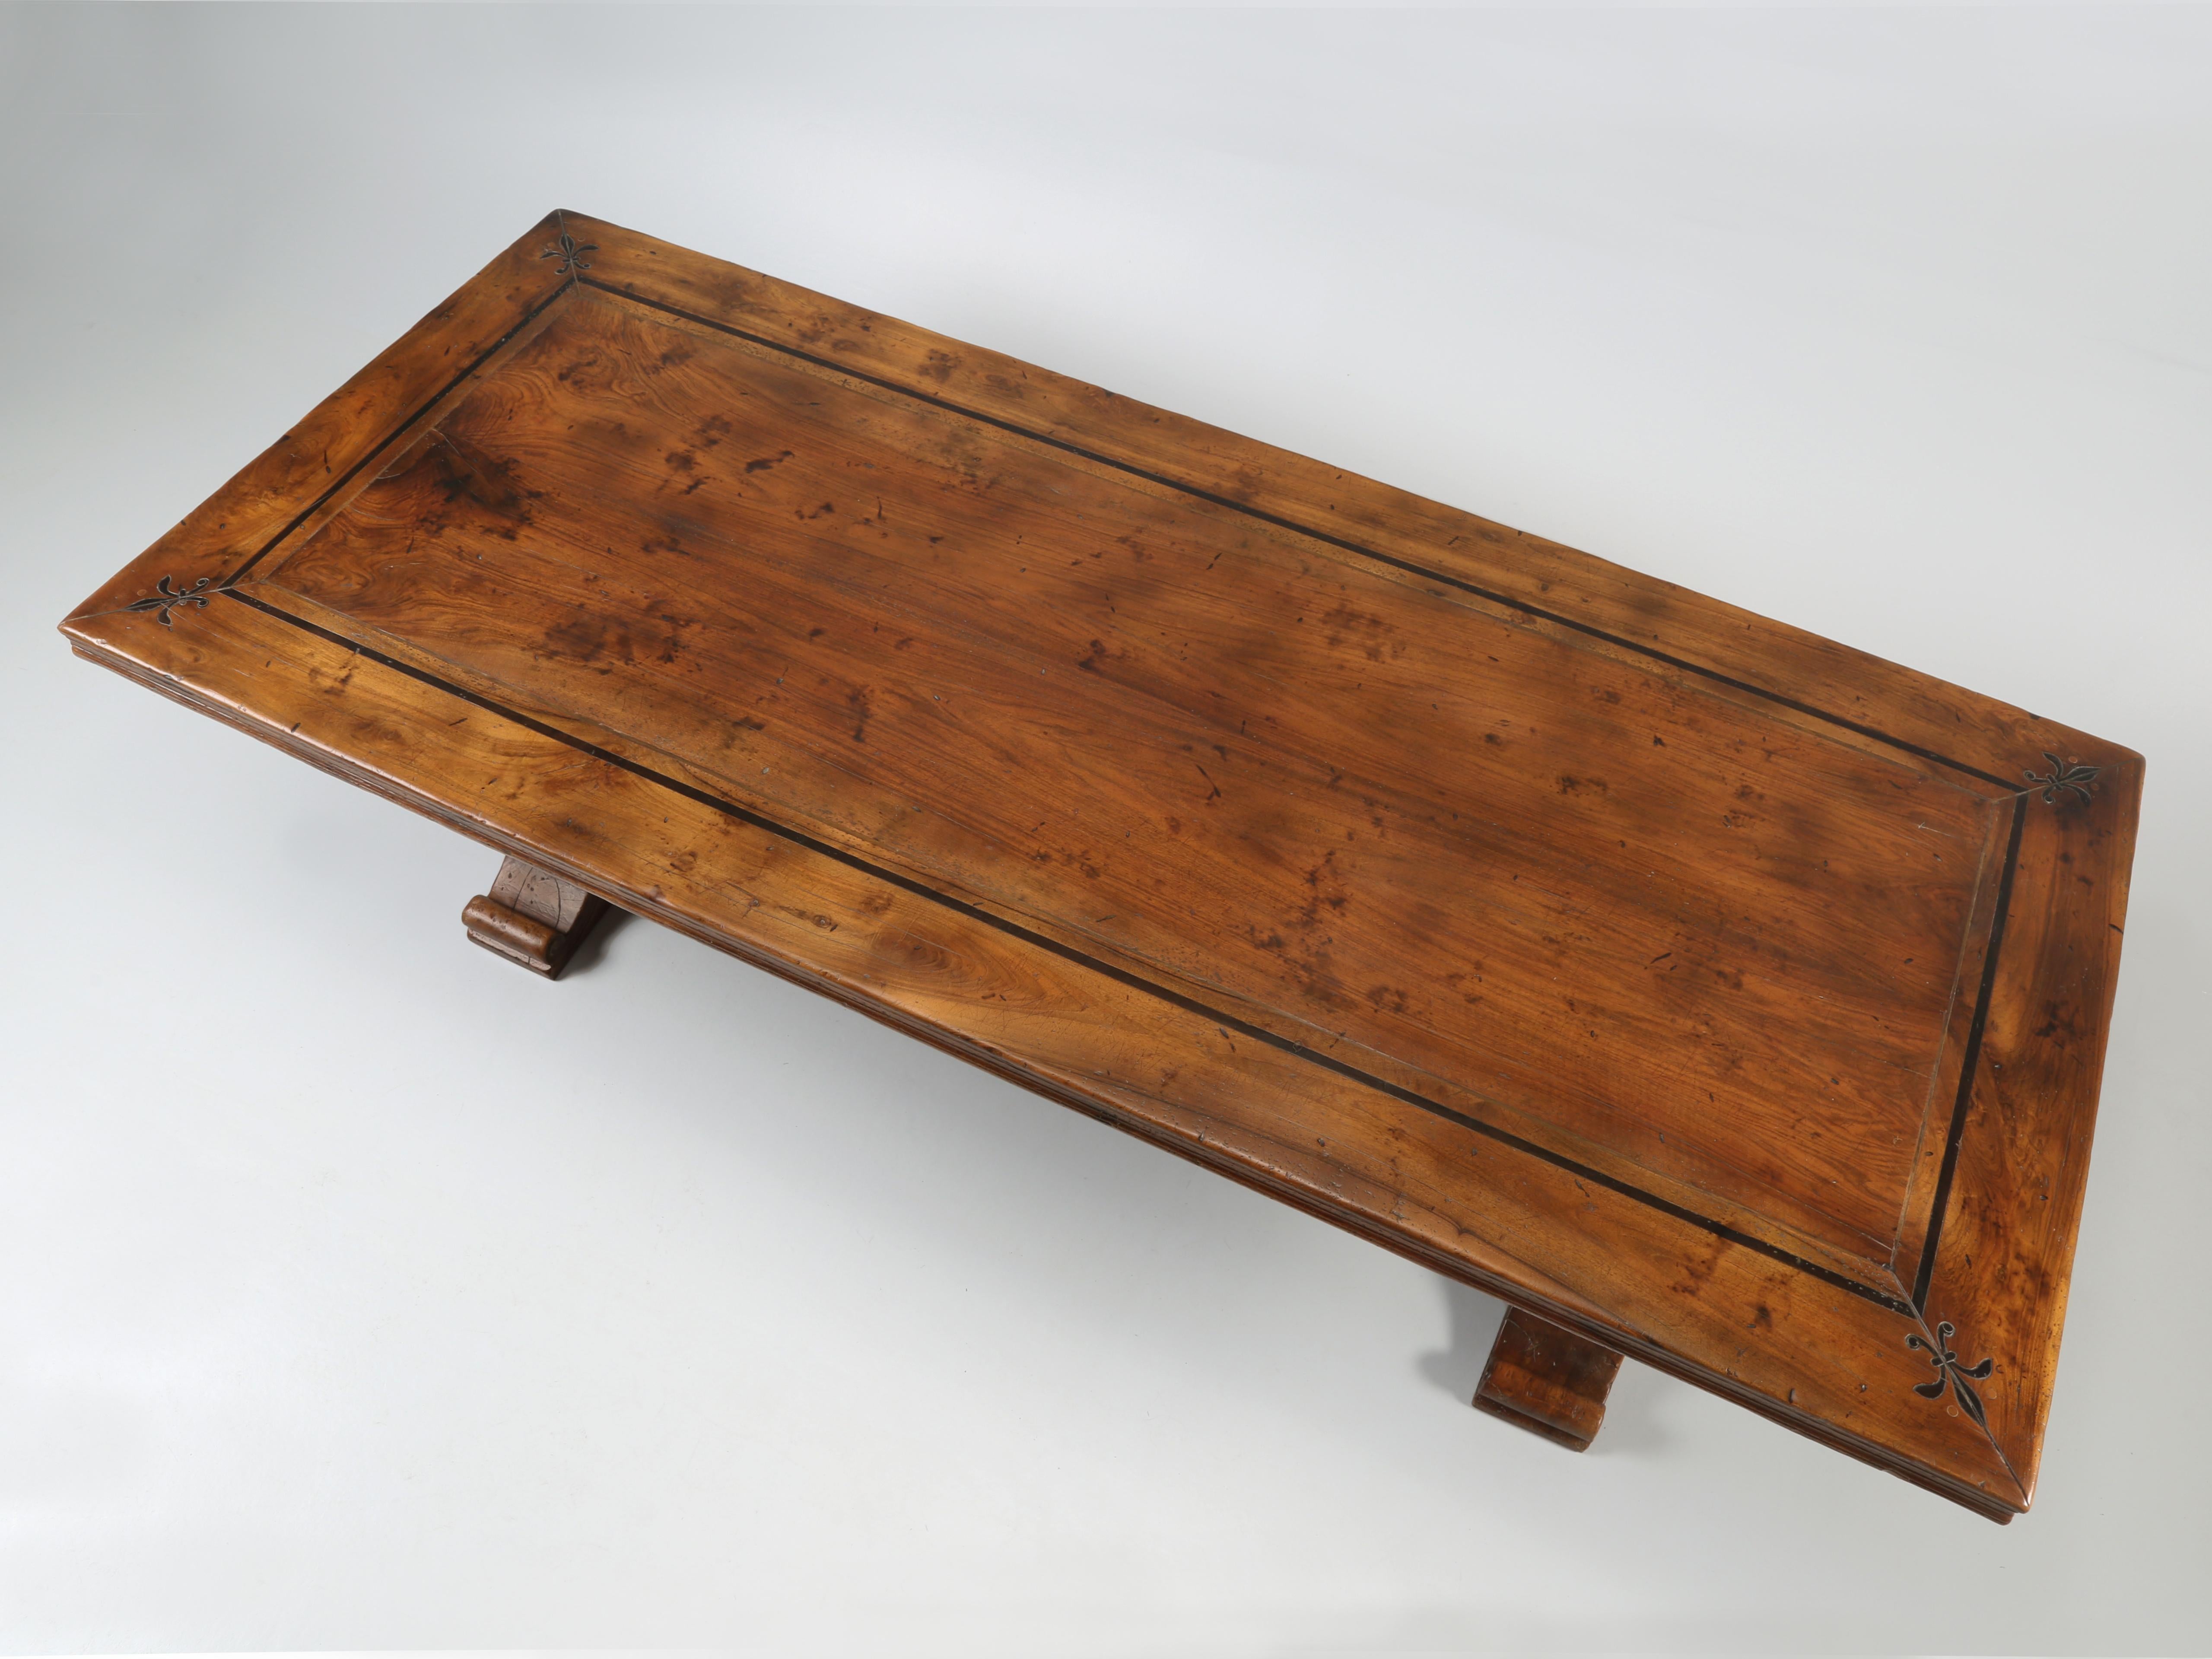 Vintage Country French walnut trestle dining table, manufactured by one of France’s premier furniture makers, Quinta. Located in the City of Perpignan, adjacent to the Mediterranean on the southwest coast, Quinta had established itself as one of the